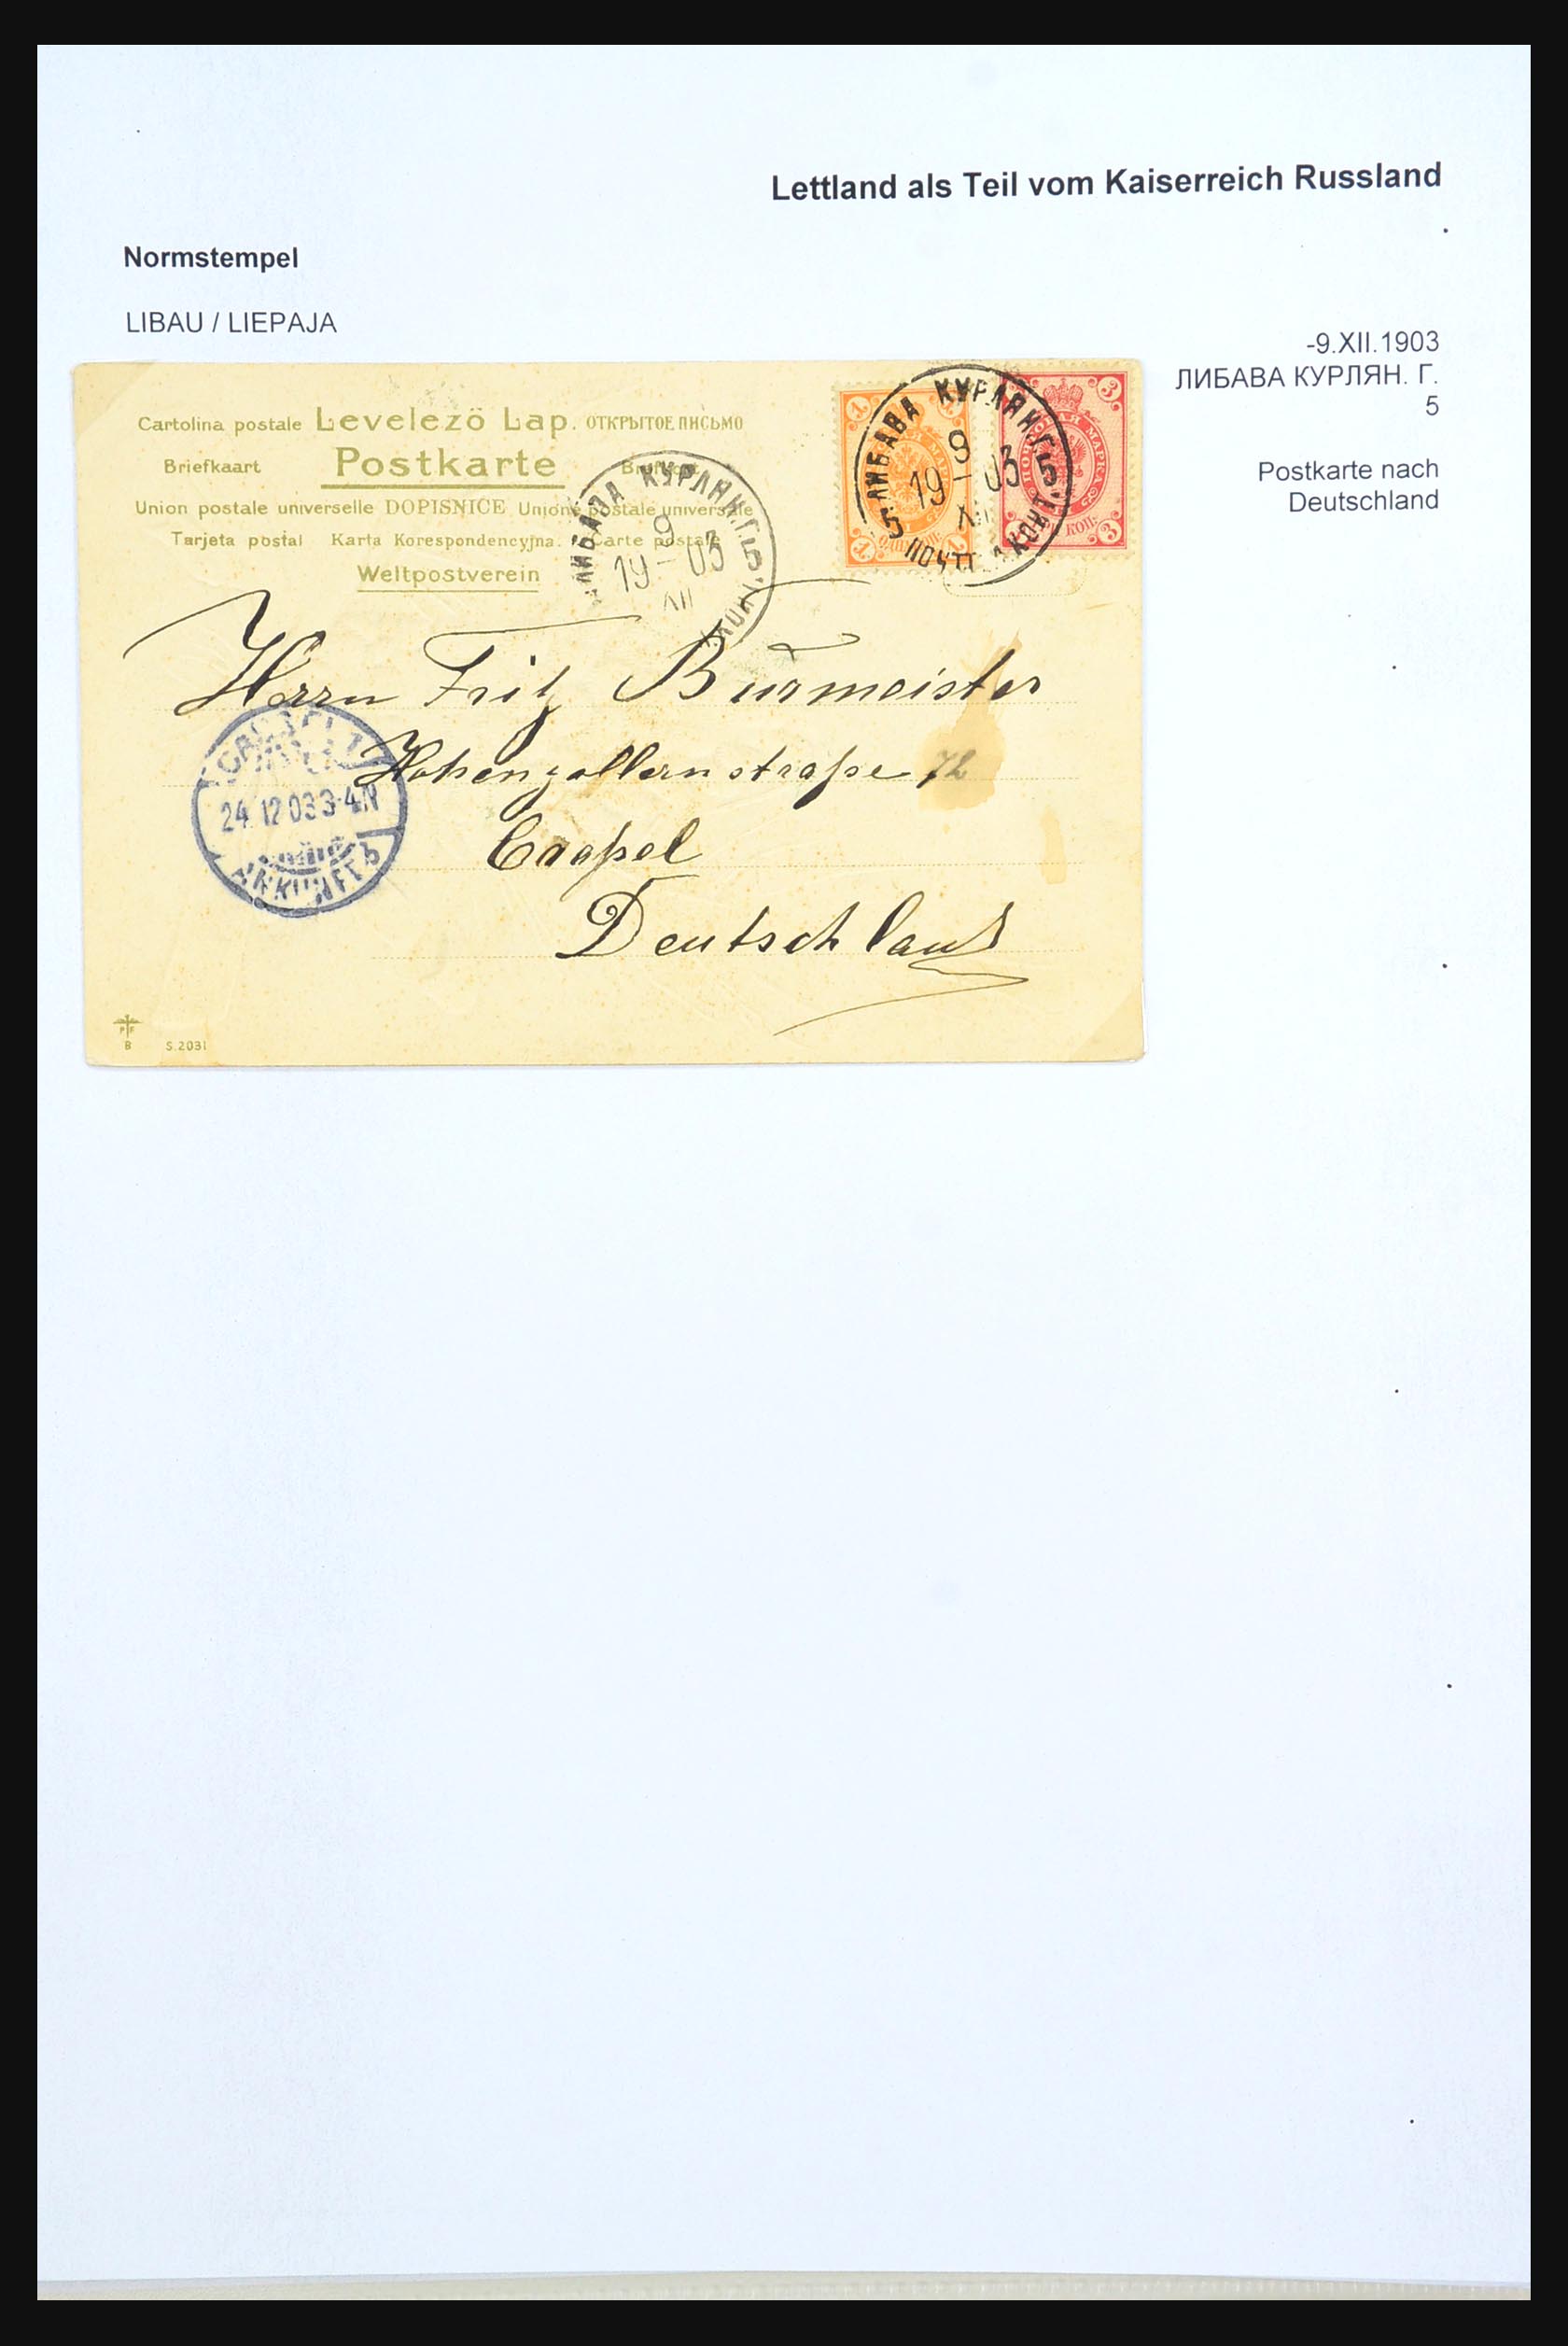 31305 081 - 31305 Latvia as part of Russia 1817-1918.